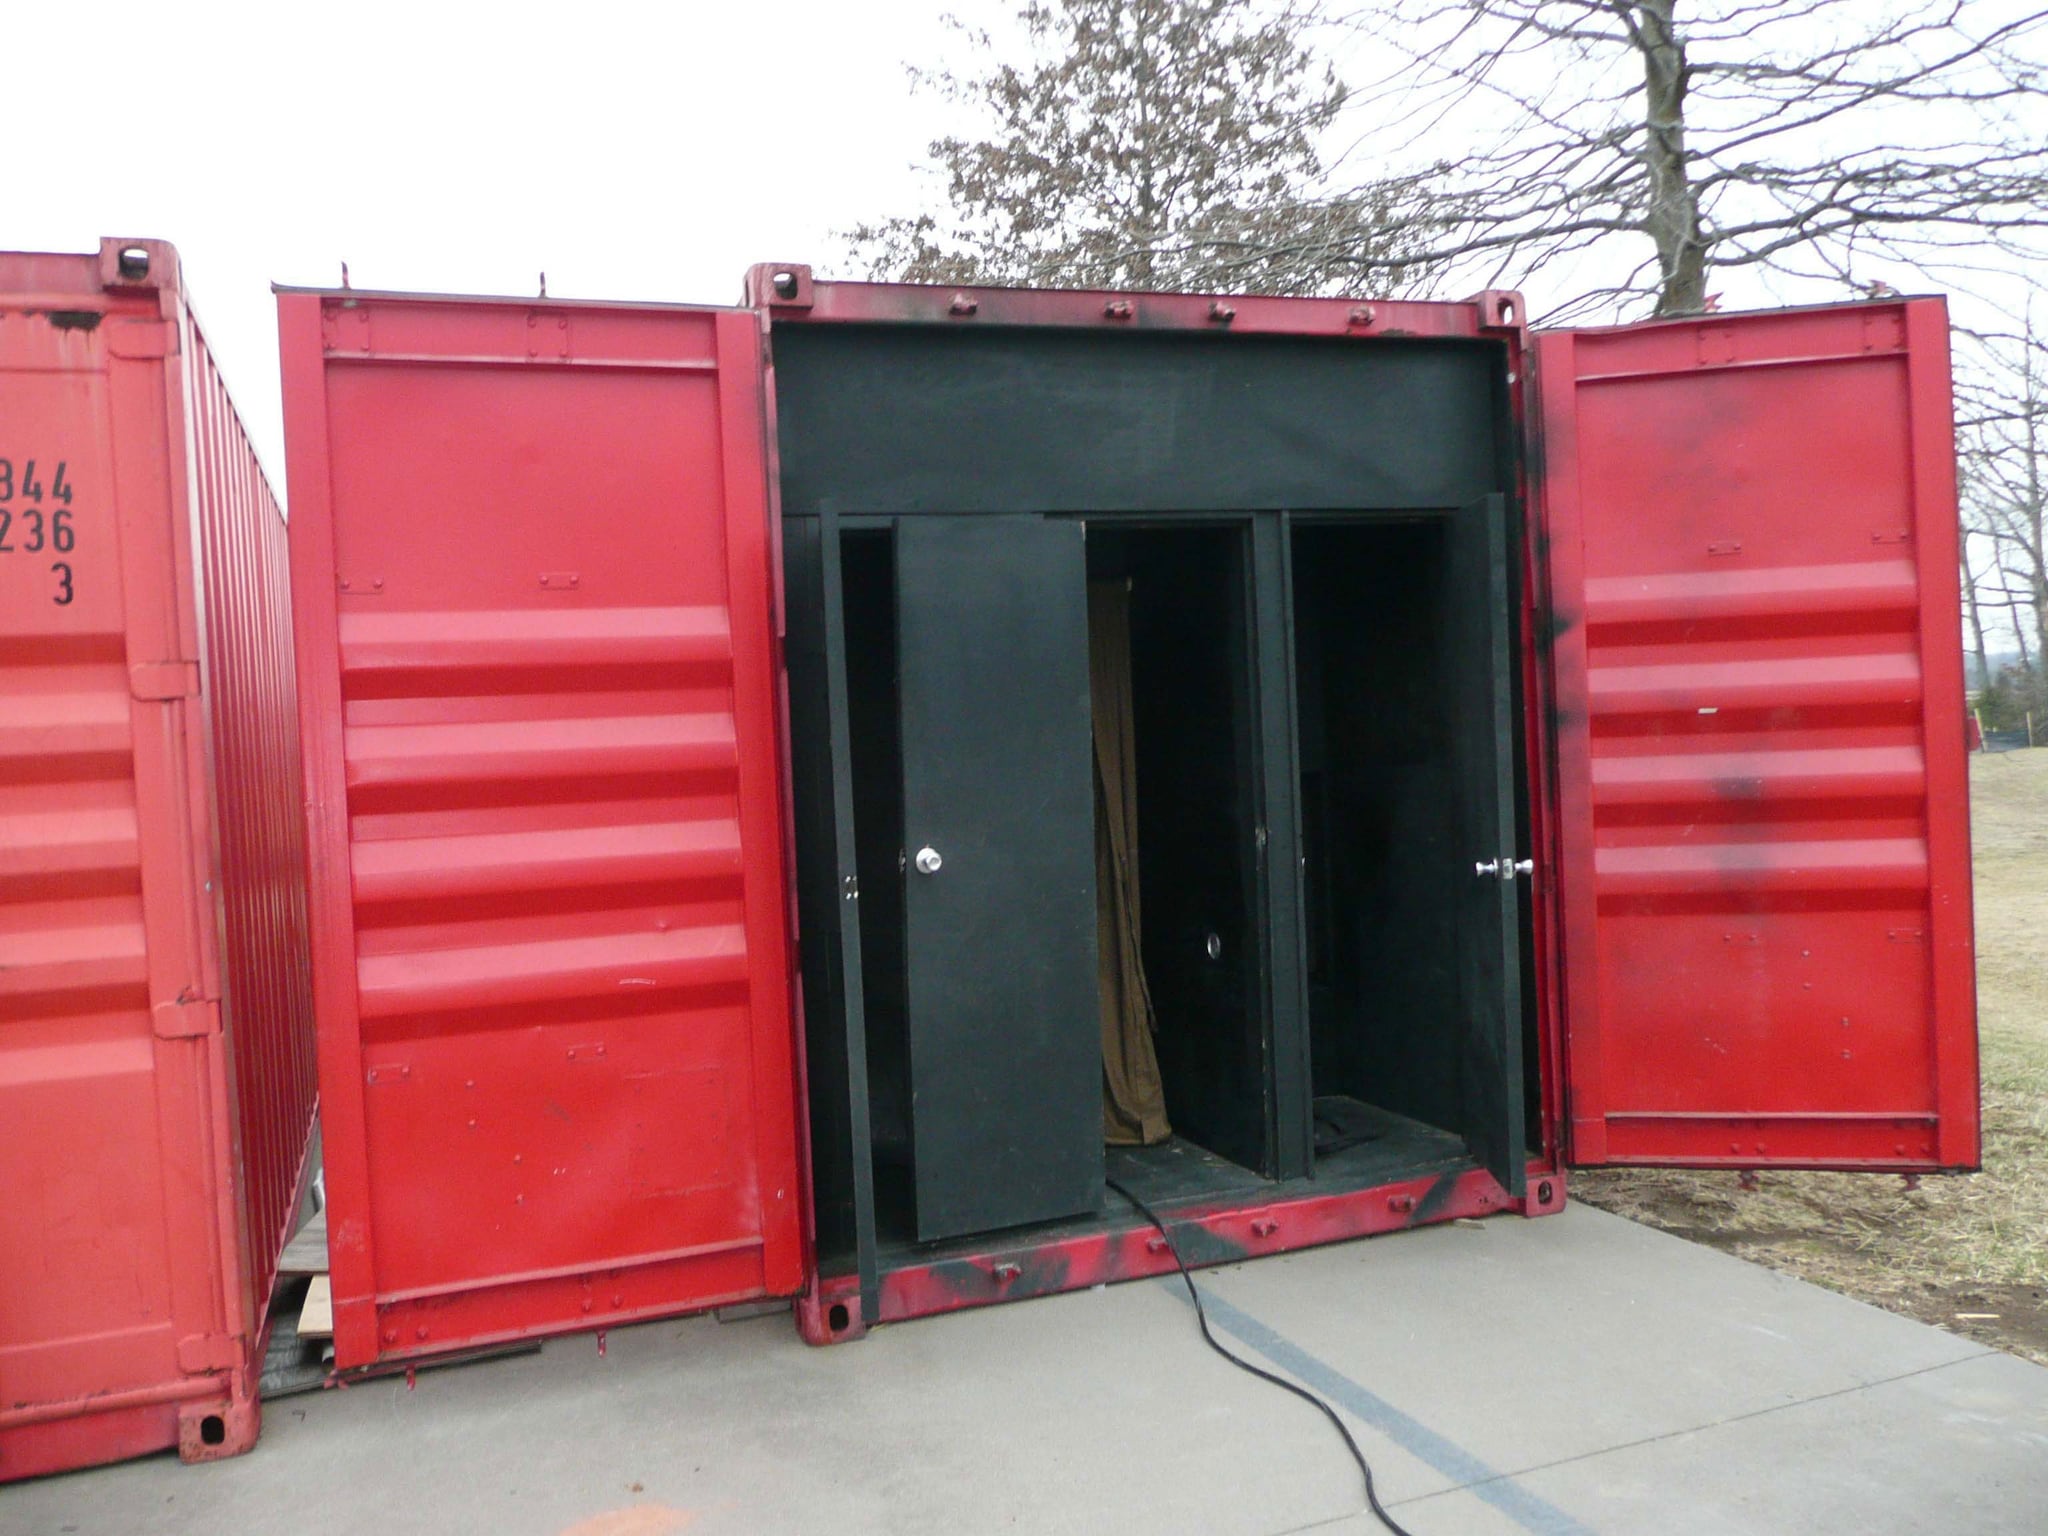 Maze practical drill trailer built inside a metal sea shipping container